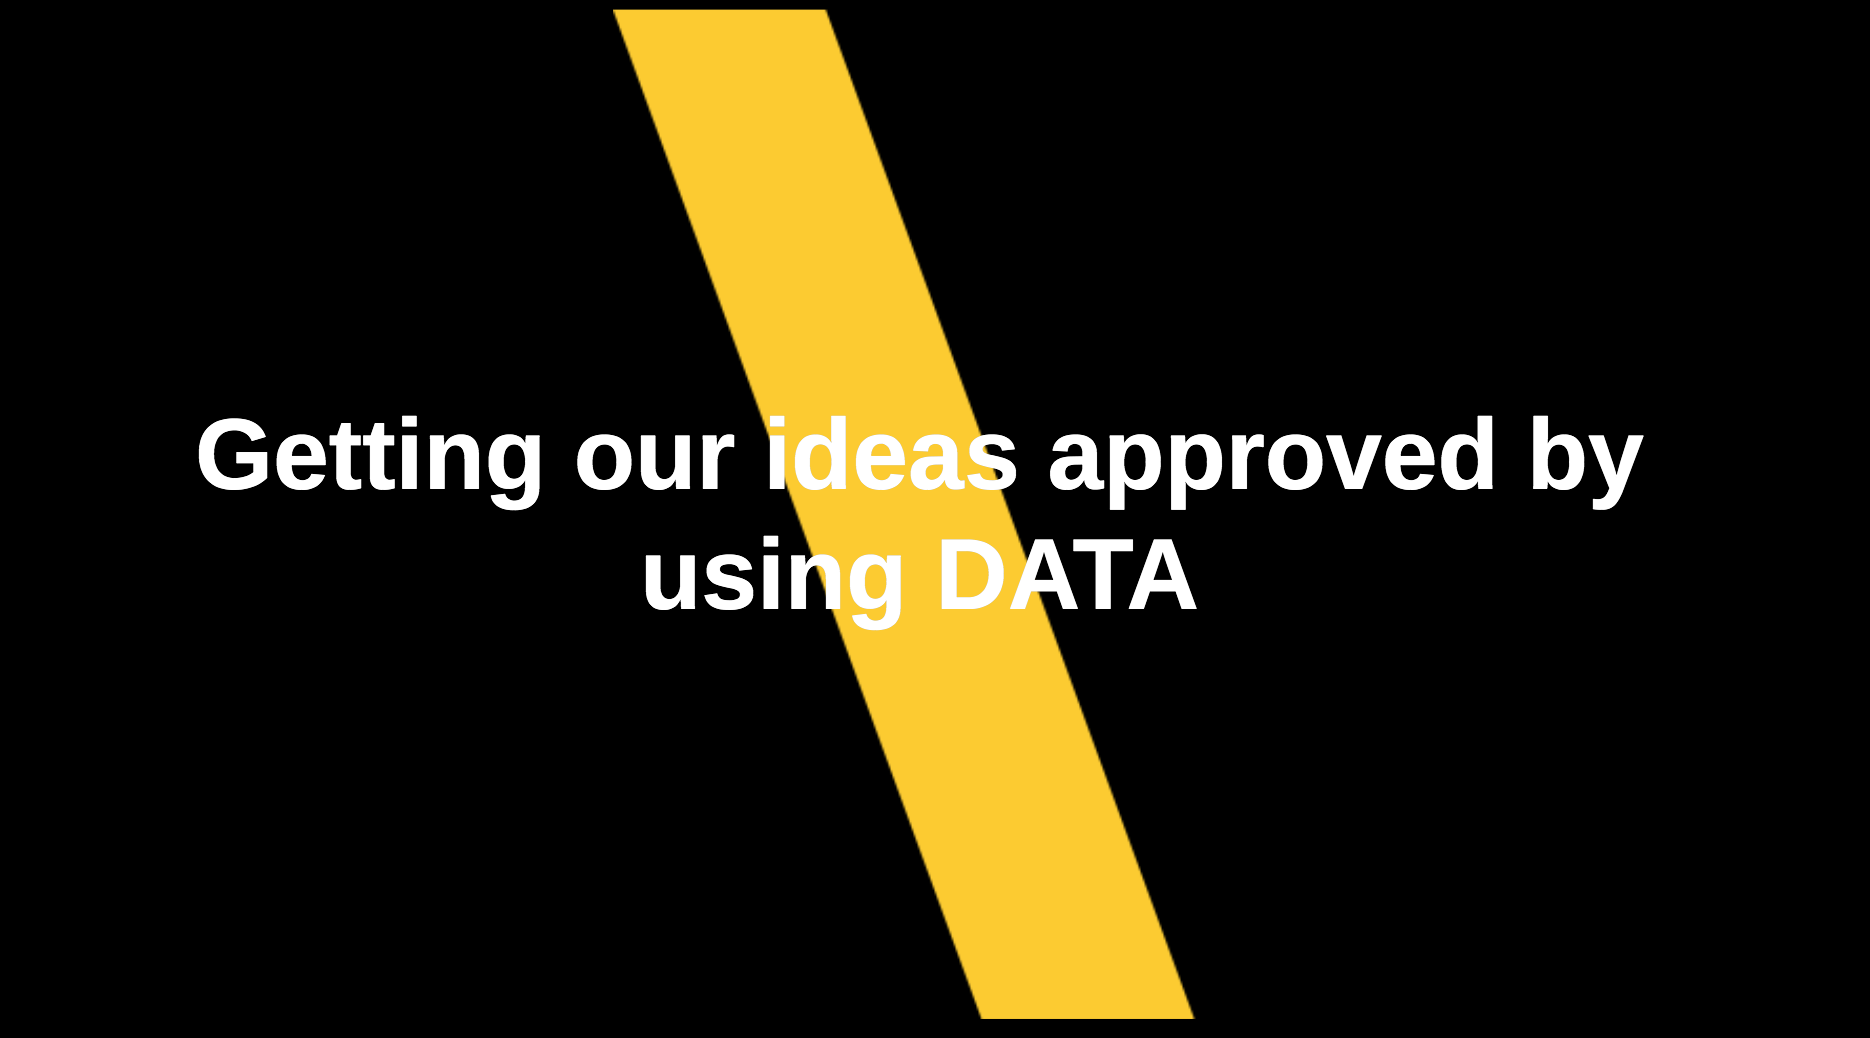 Getting our ideas approved by using DATA